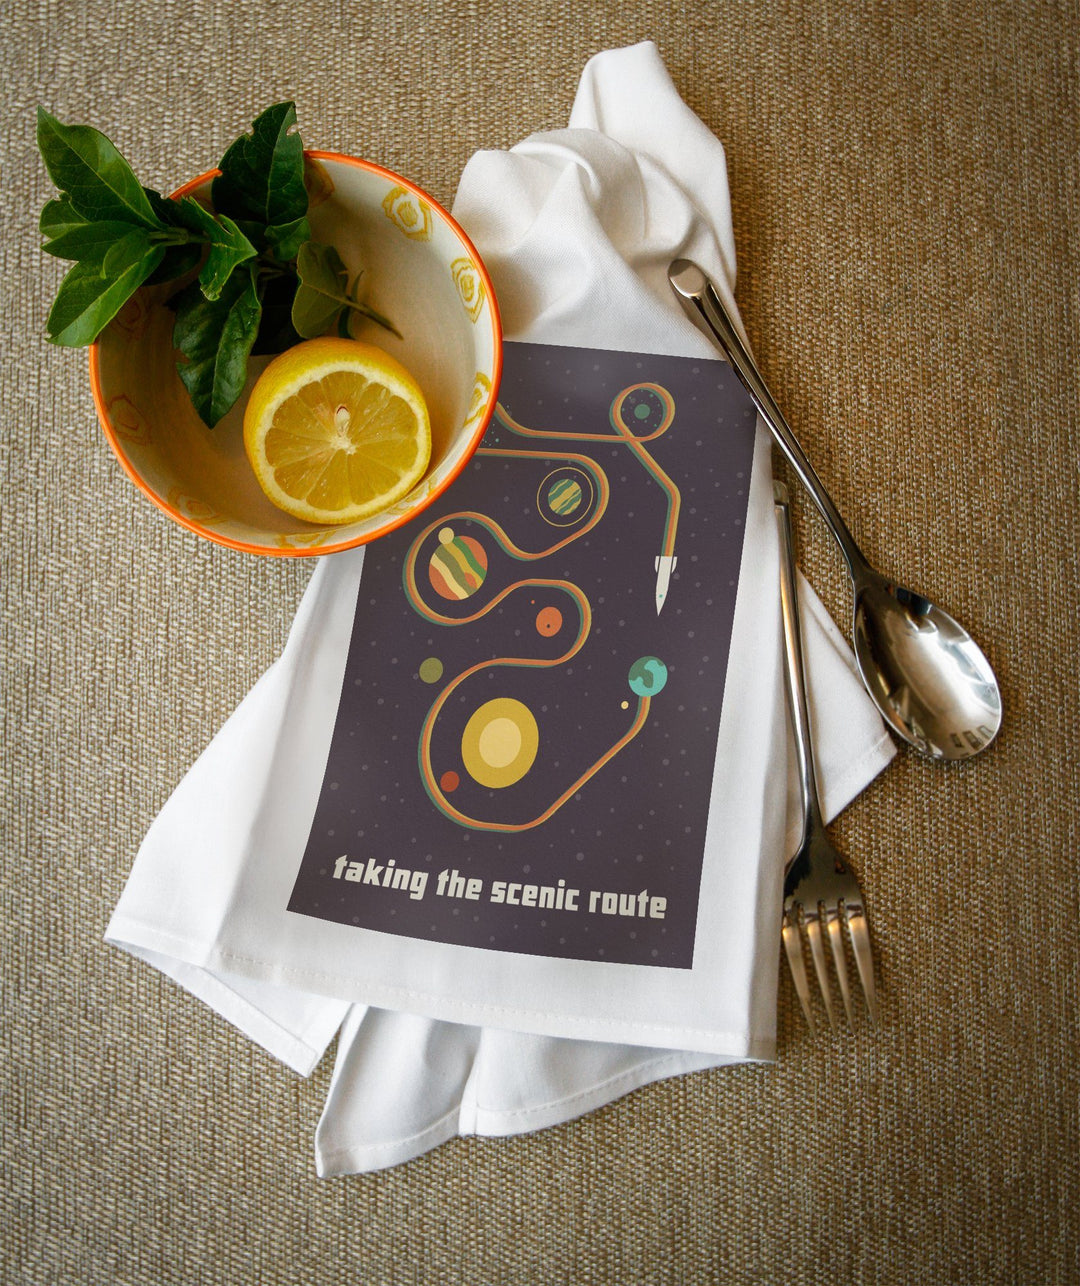 Space Is The Place Collection, Solar System, Taking The Scenic Route, Towels and Aprons Kitchen Lantern Press 